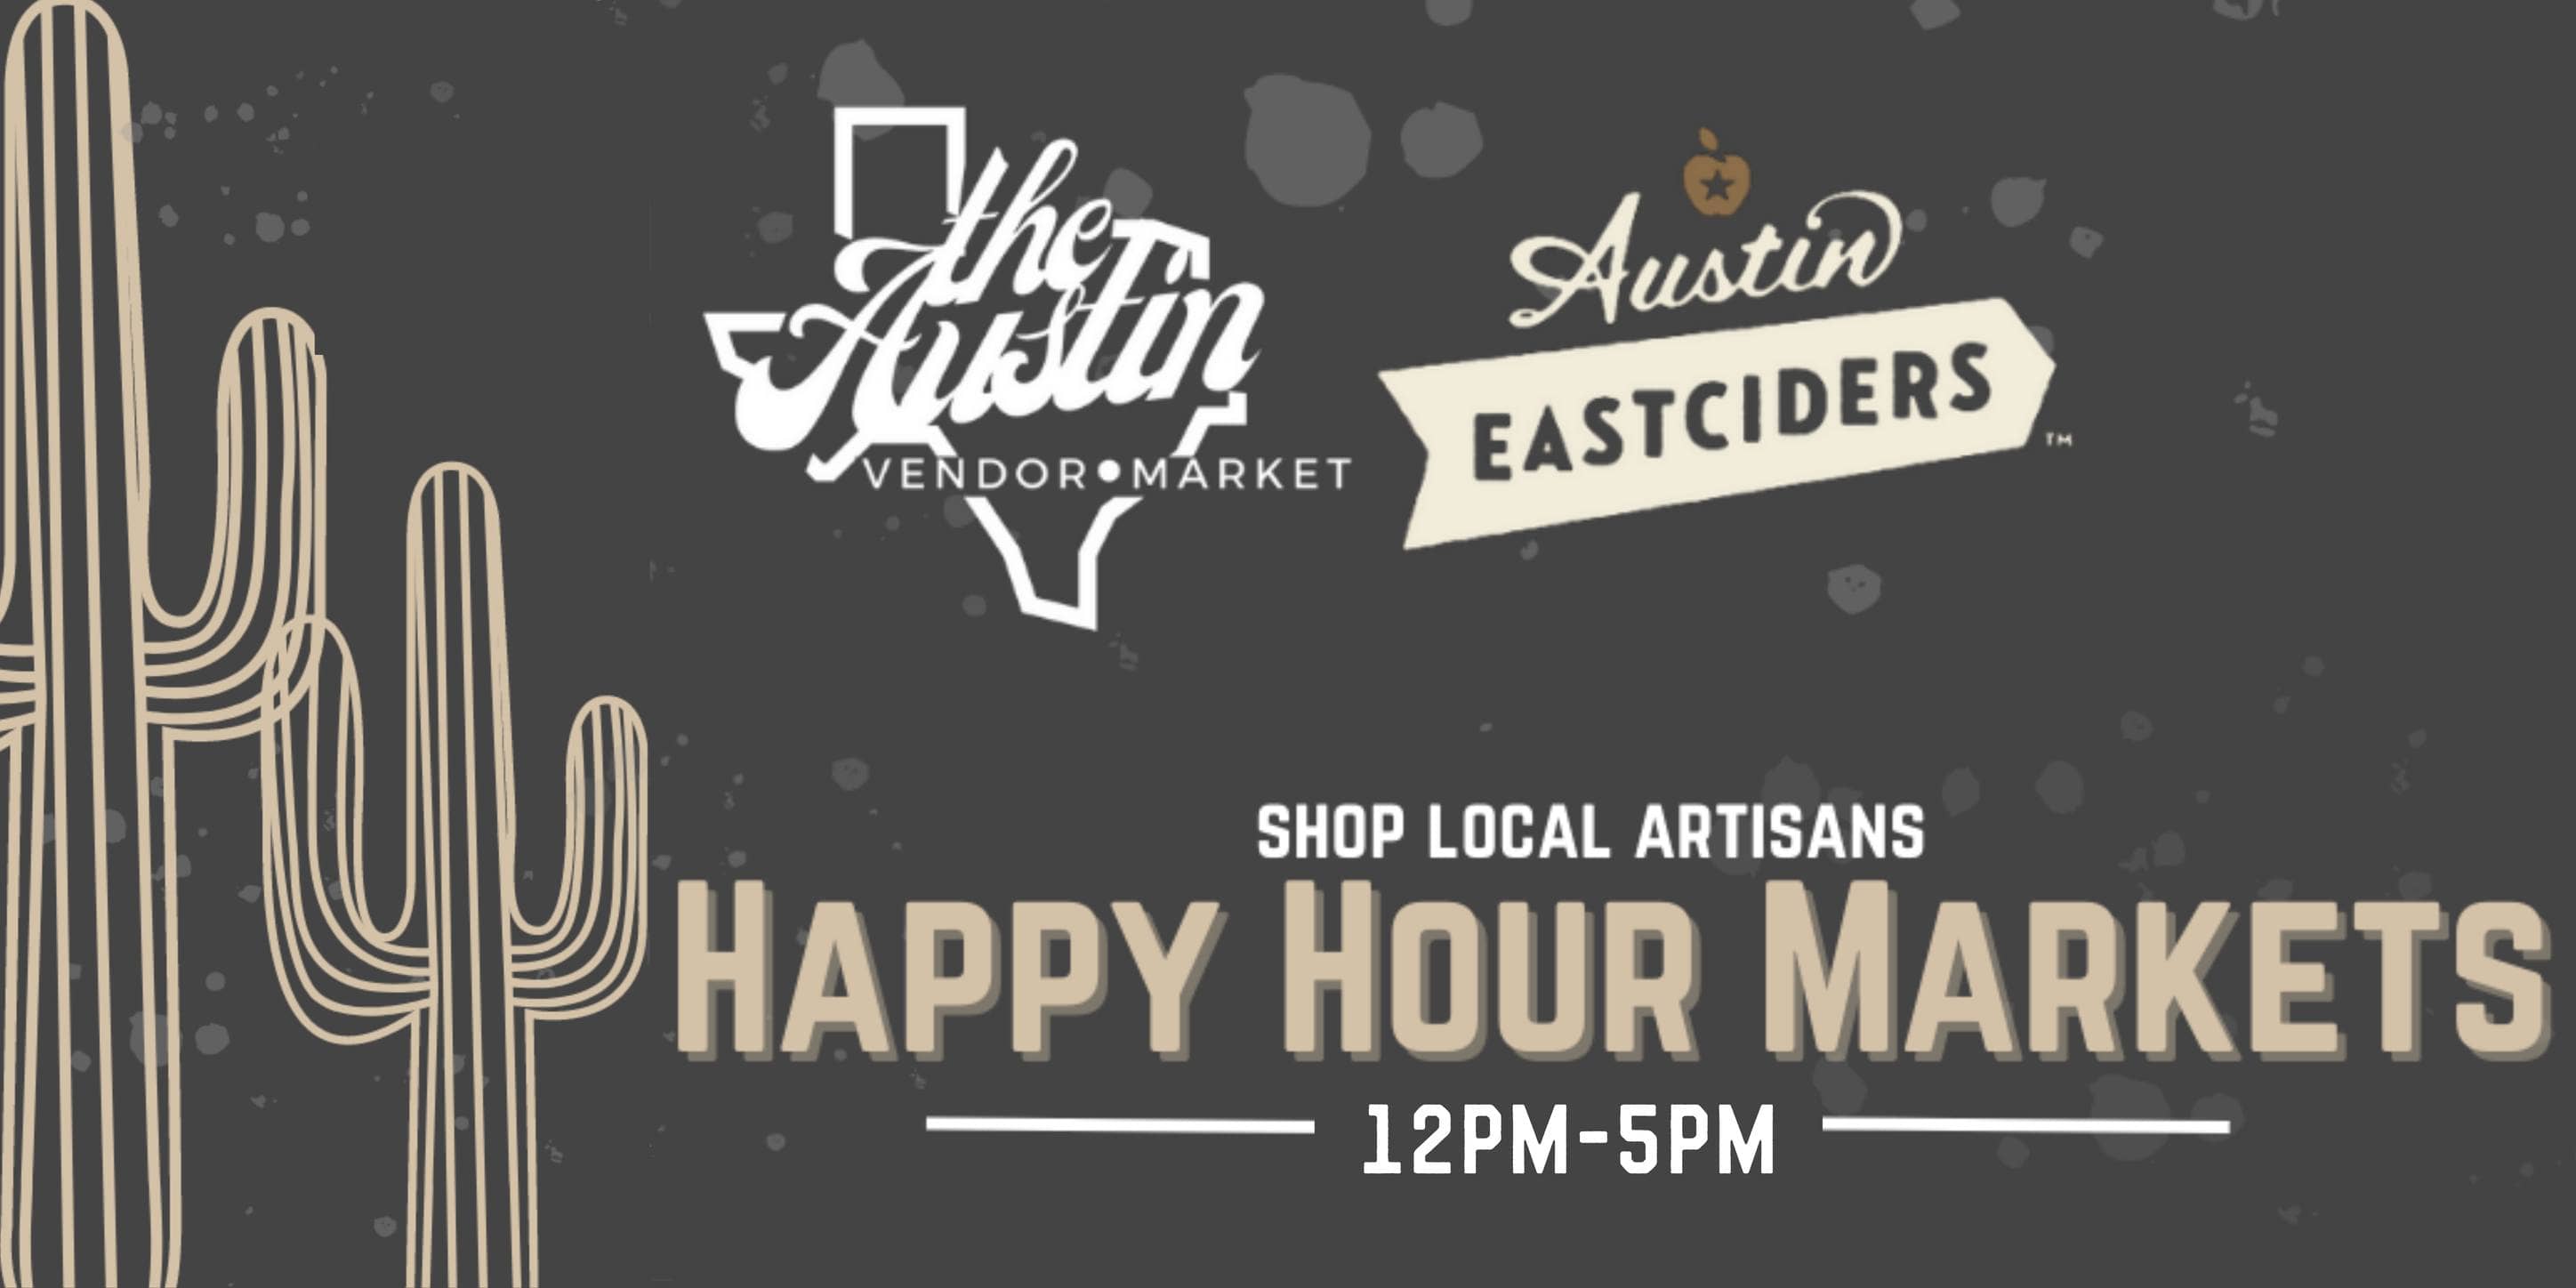 happy hour markets austin eastciders